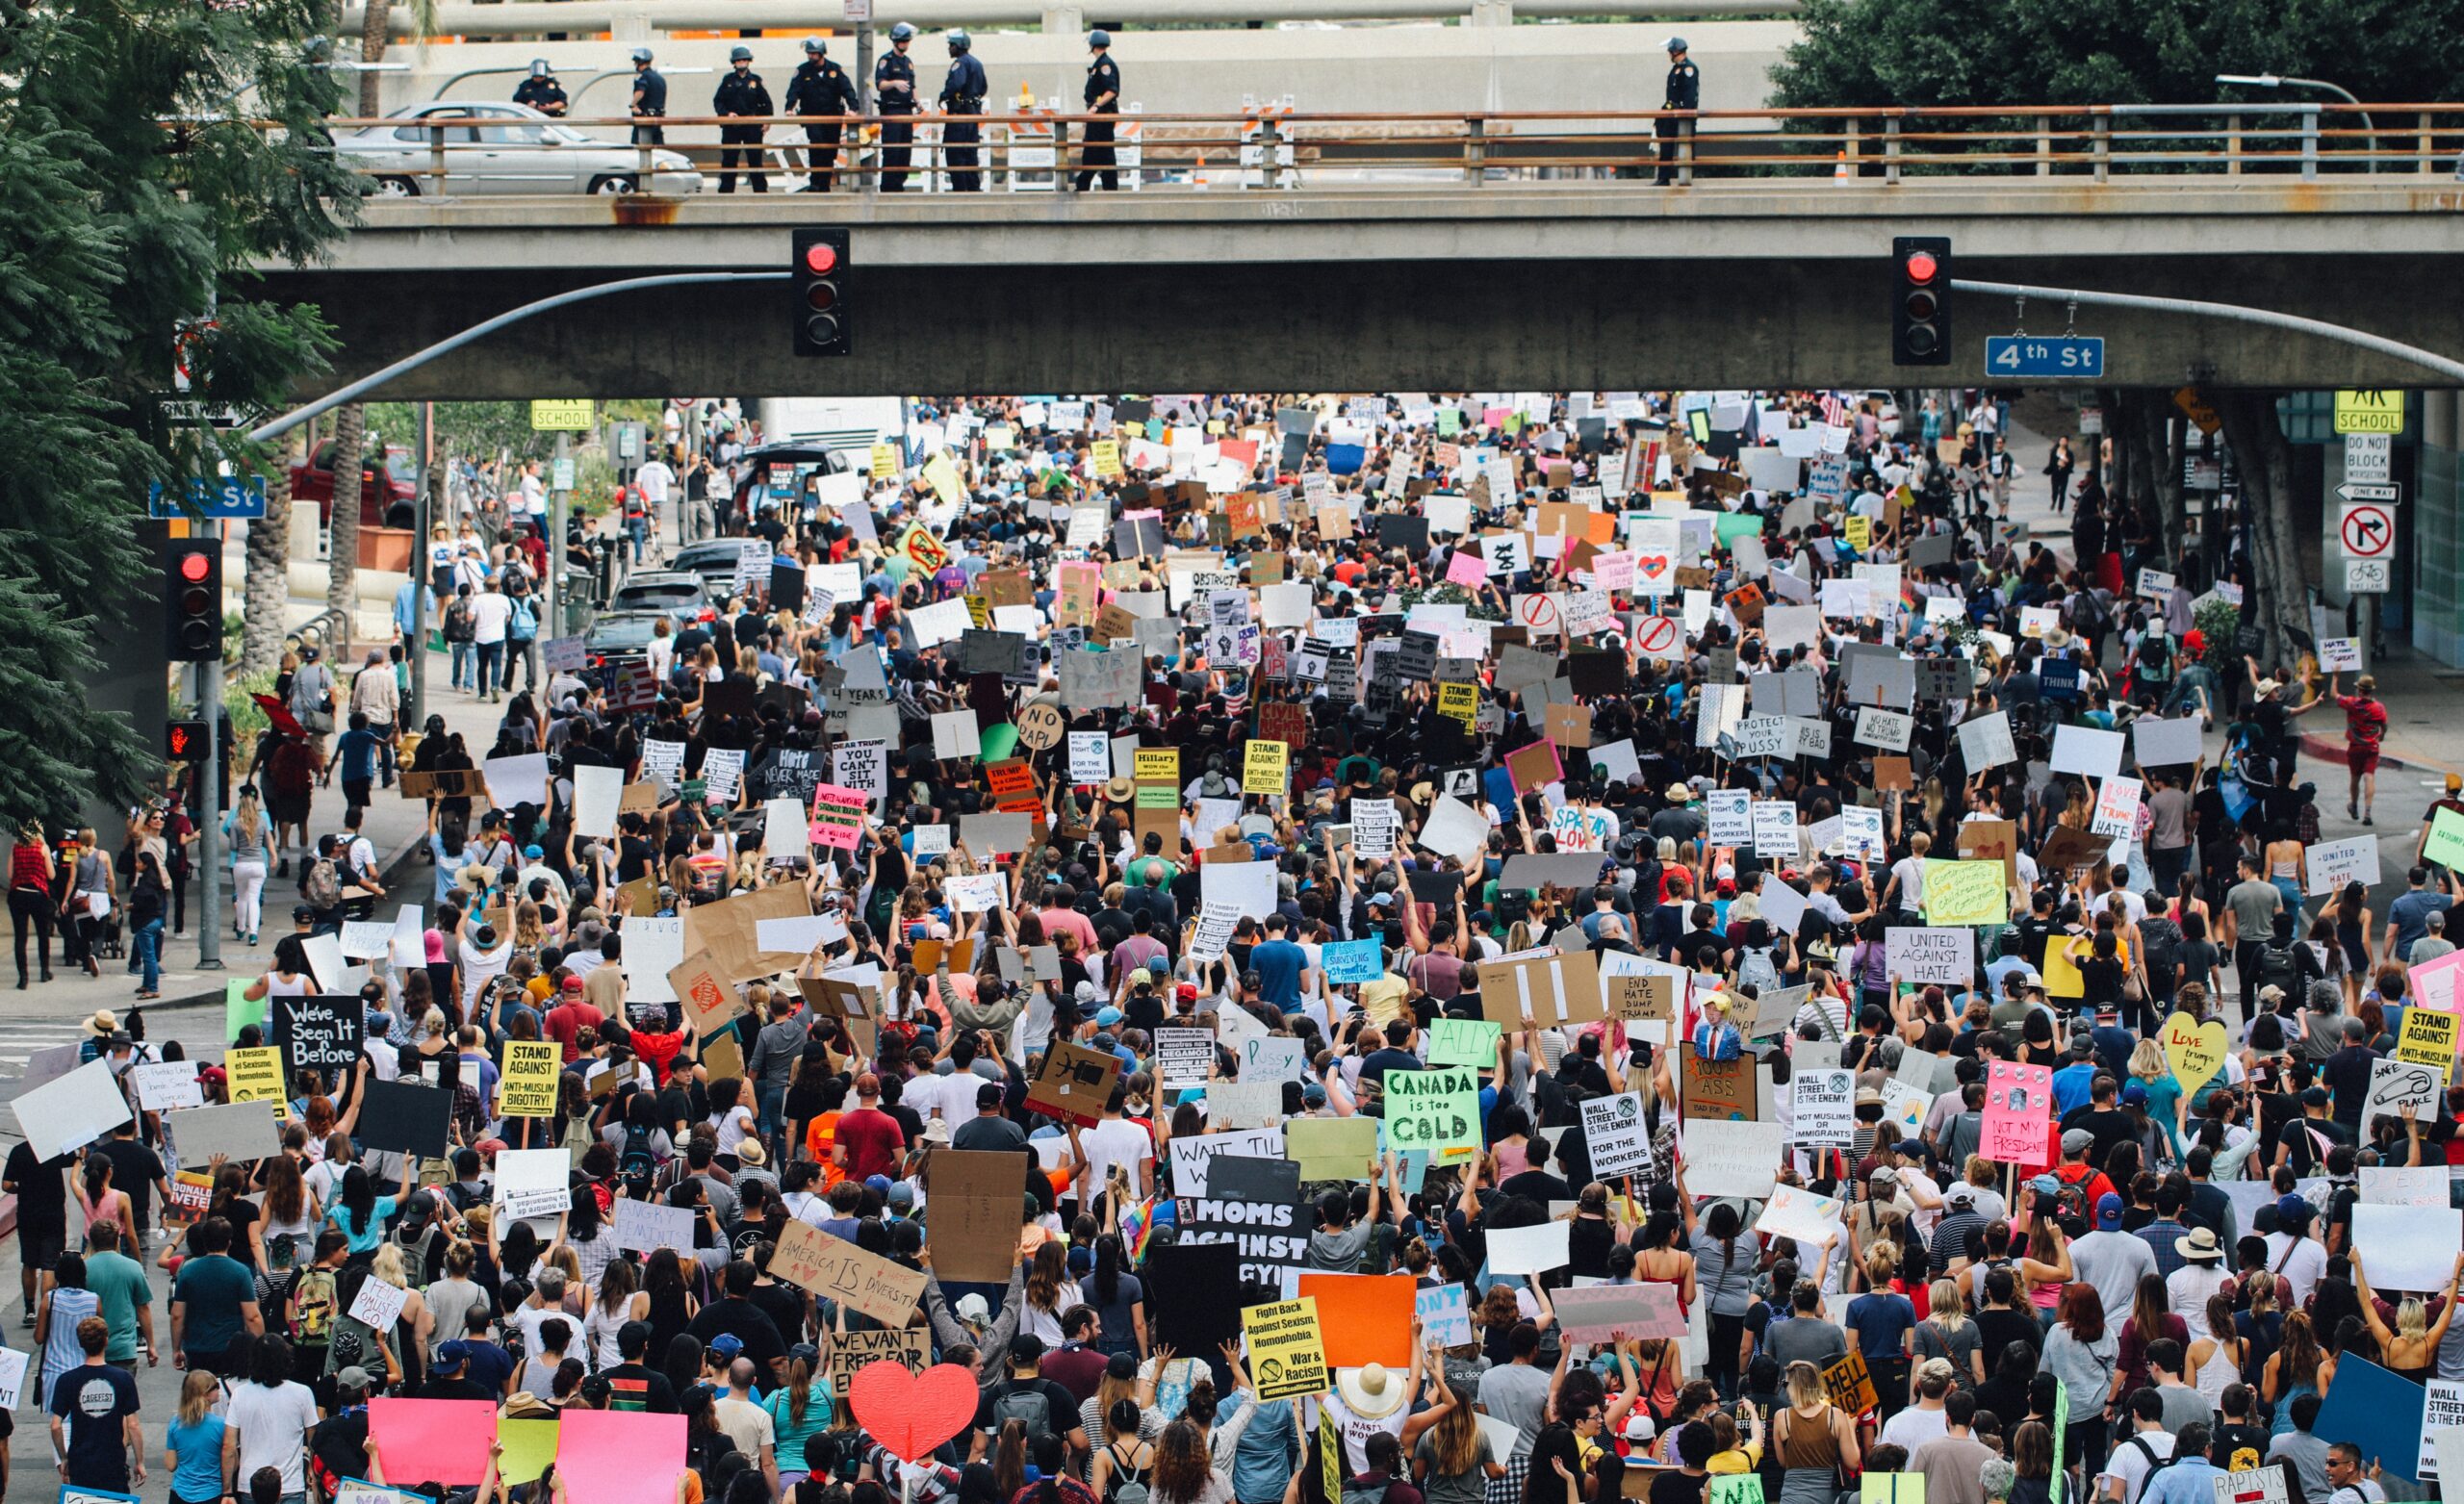 Photo of protestors blocking a road and holding signs against racism